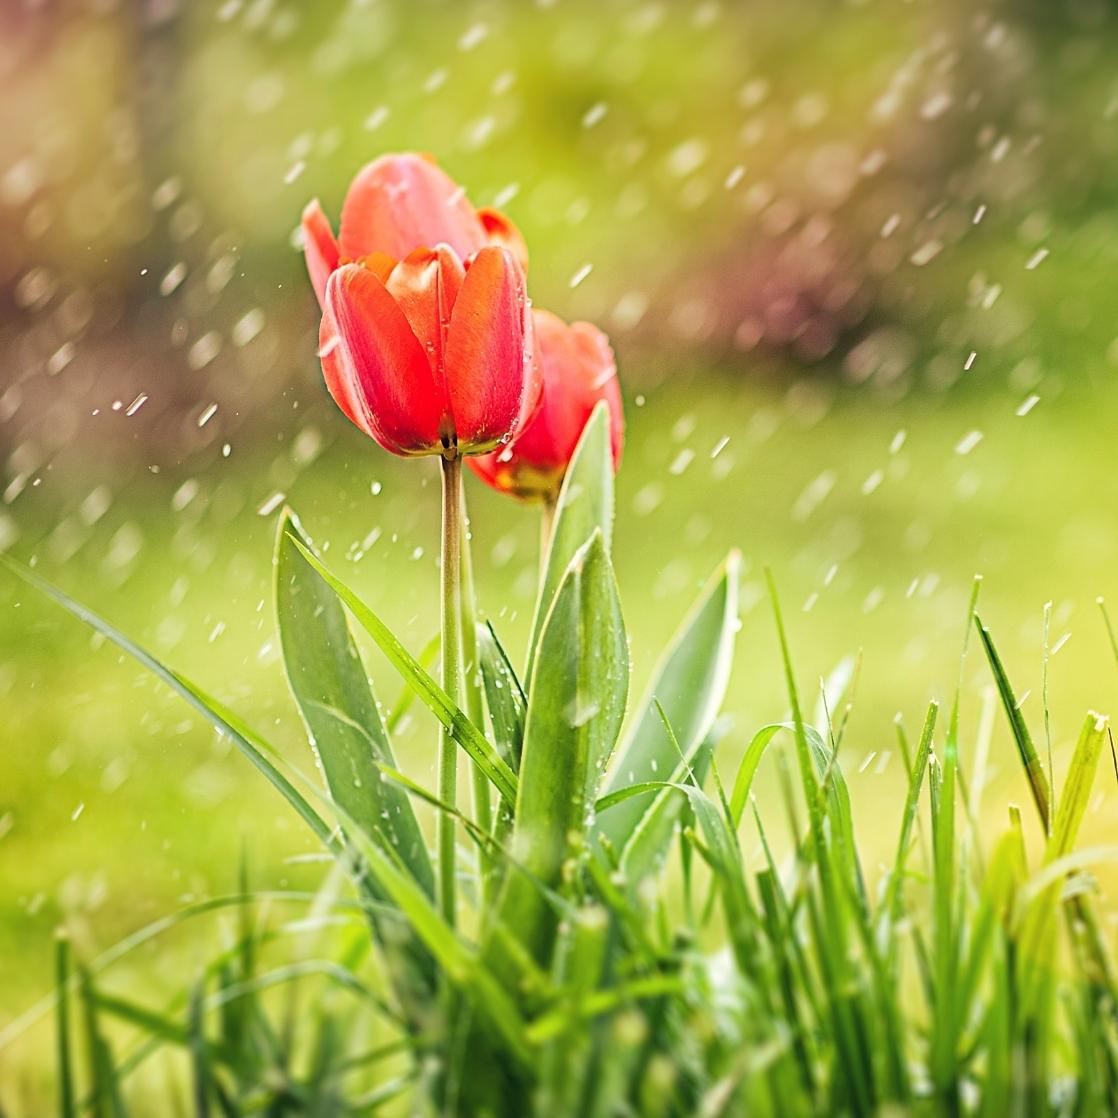 Flowers in Rain Images